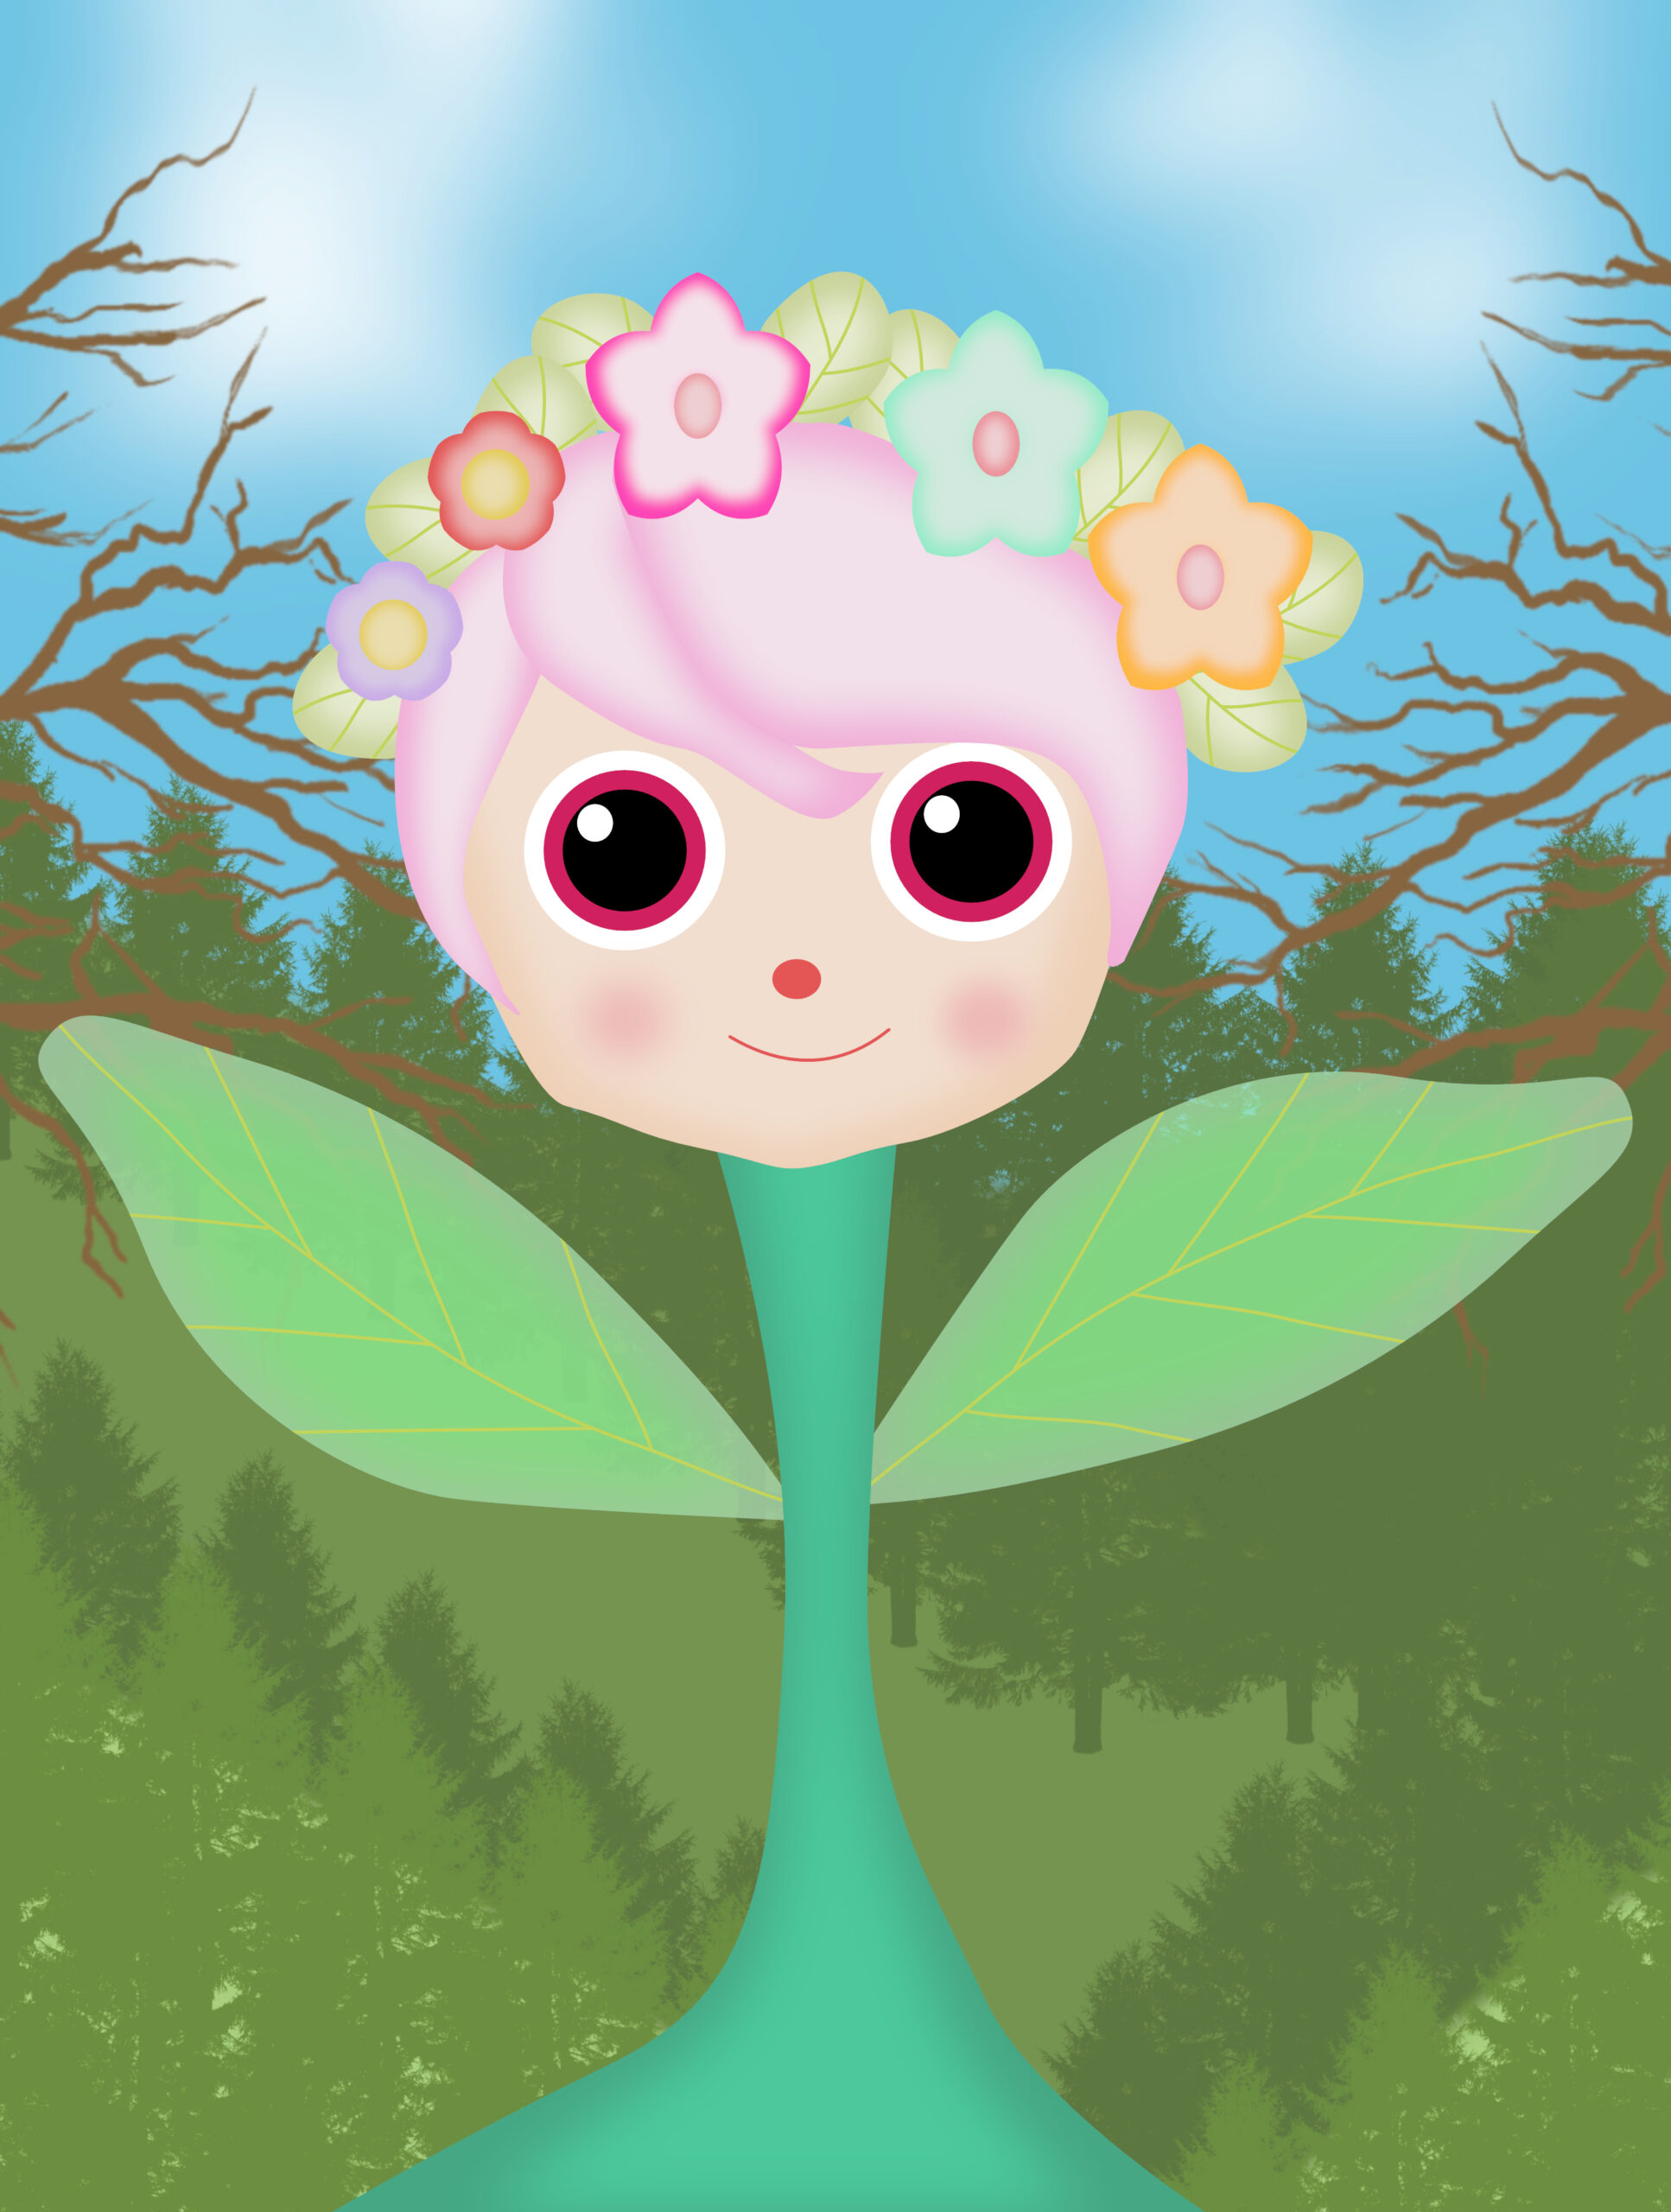 Pixie Petal – Character Insight